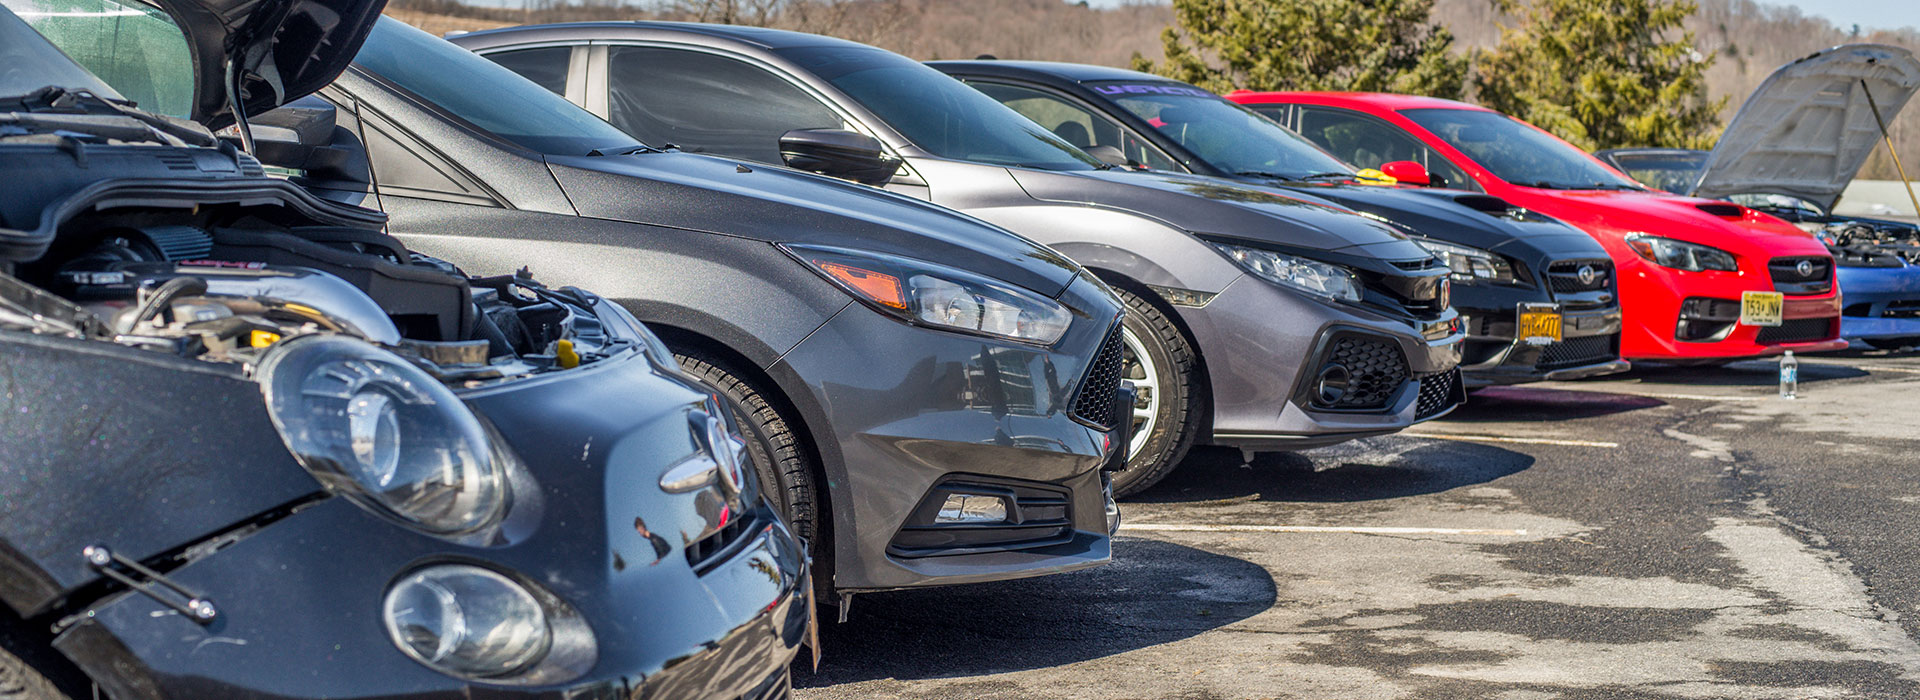 Row of cars ready for the car show; Photo credit: Impavidus Studios Photography